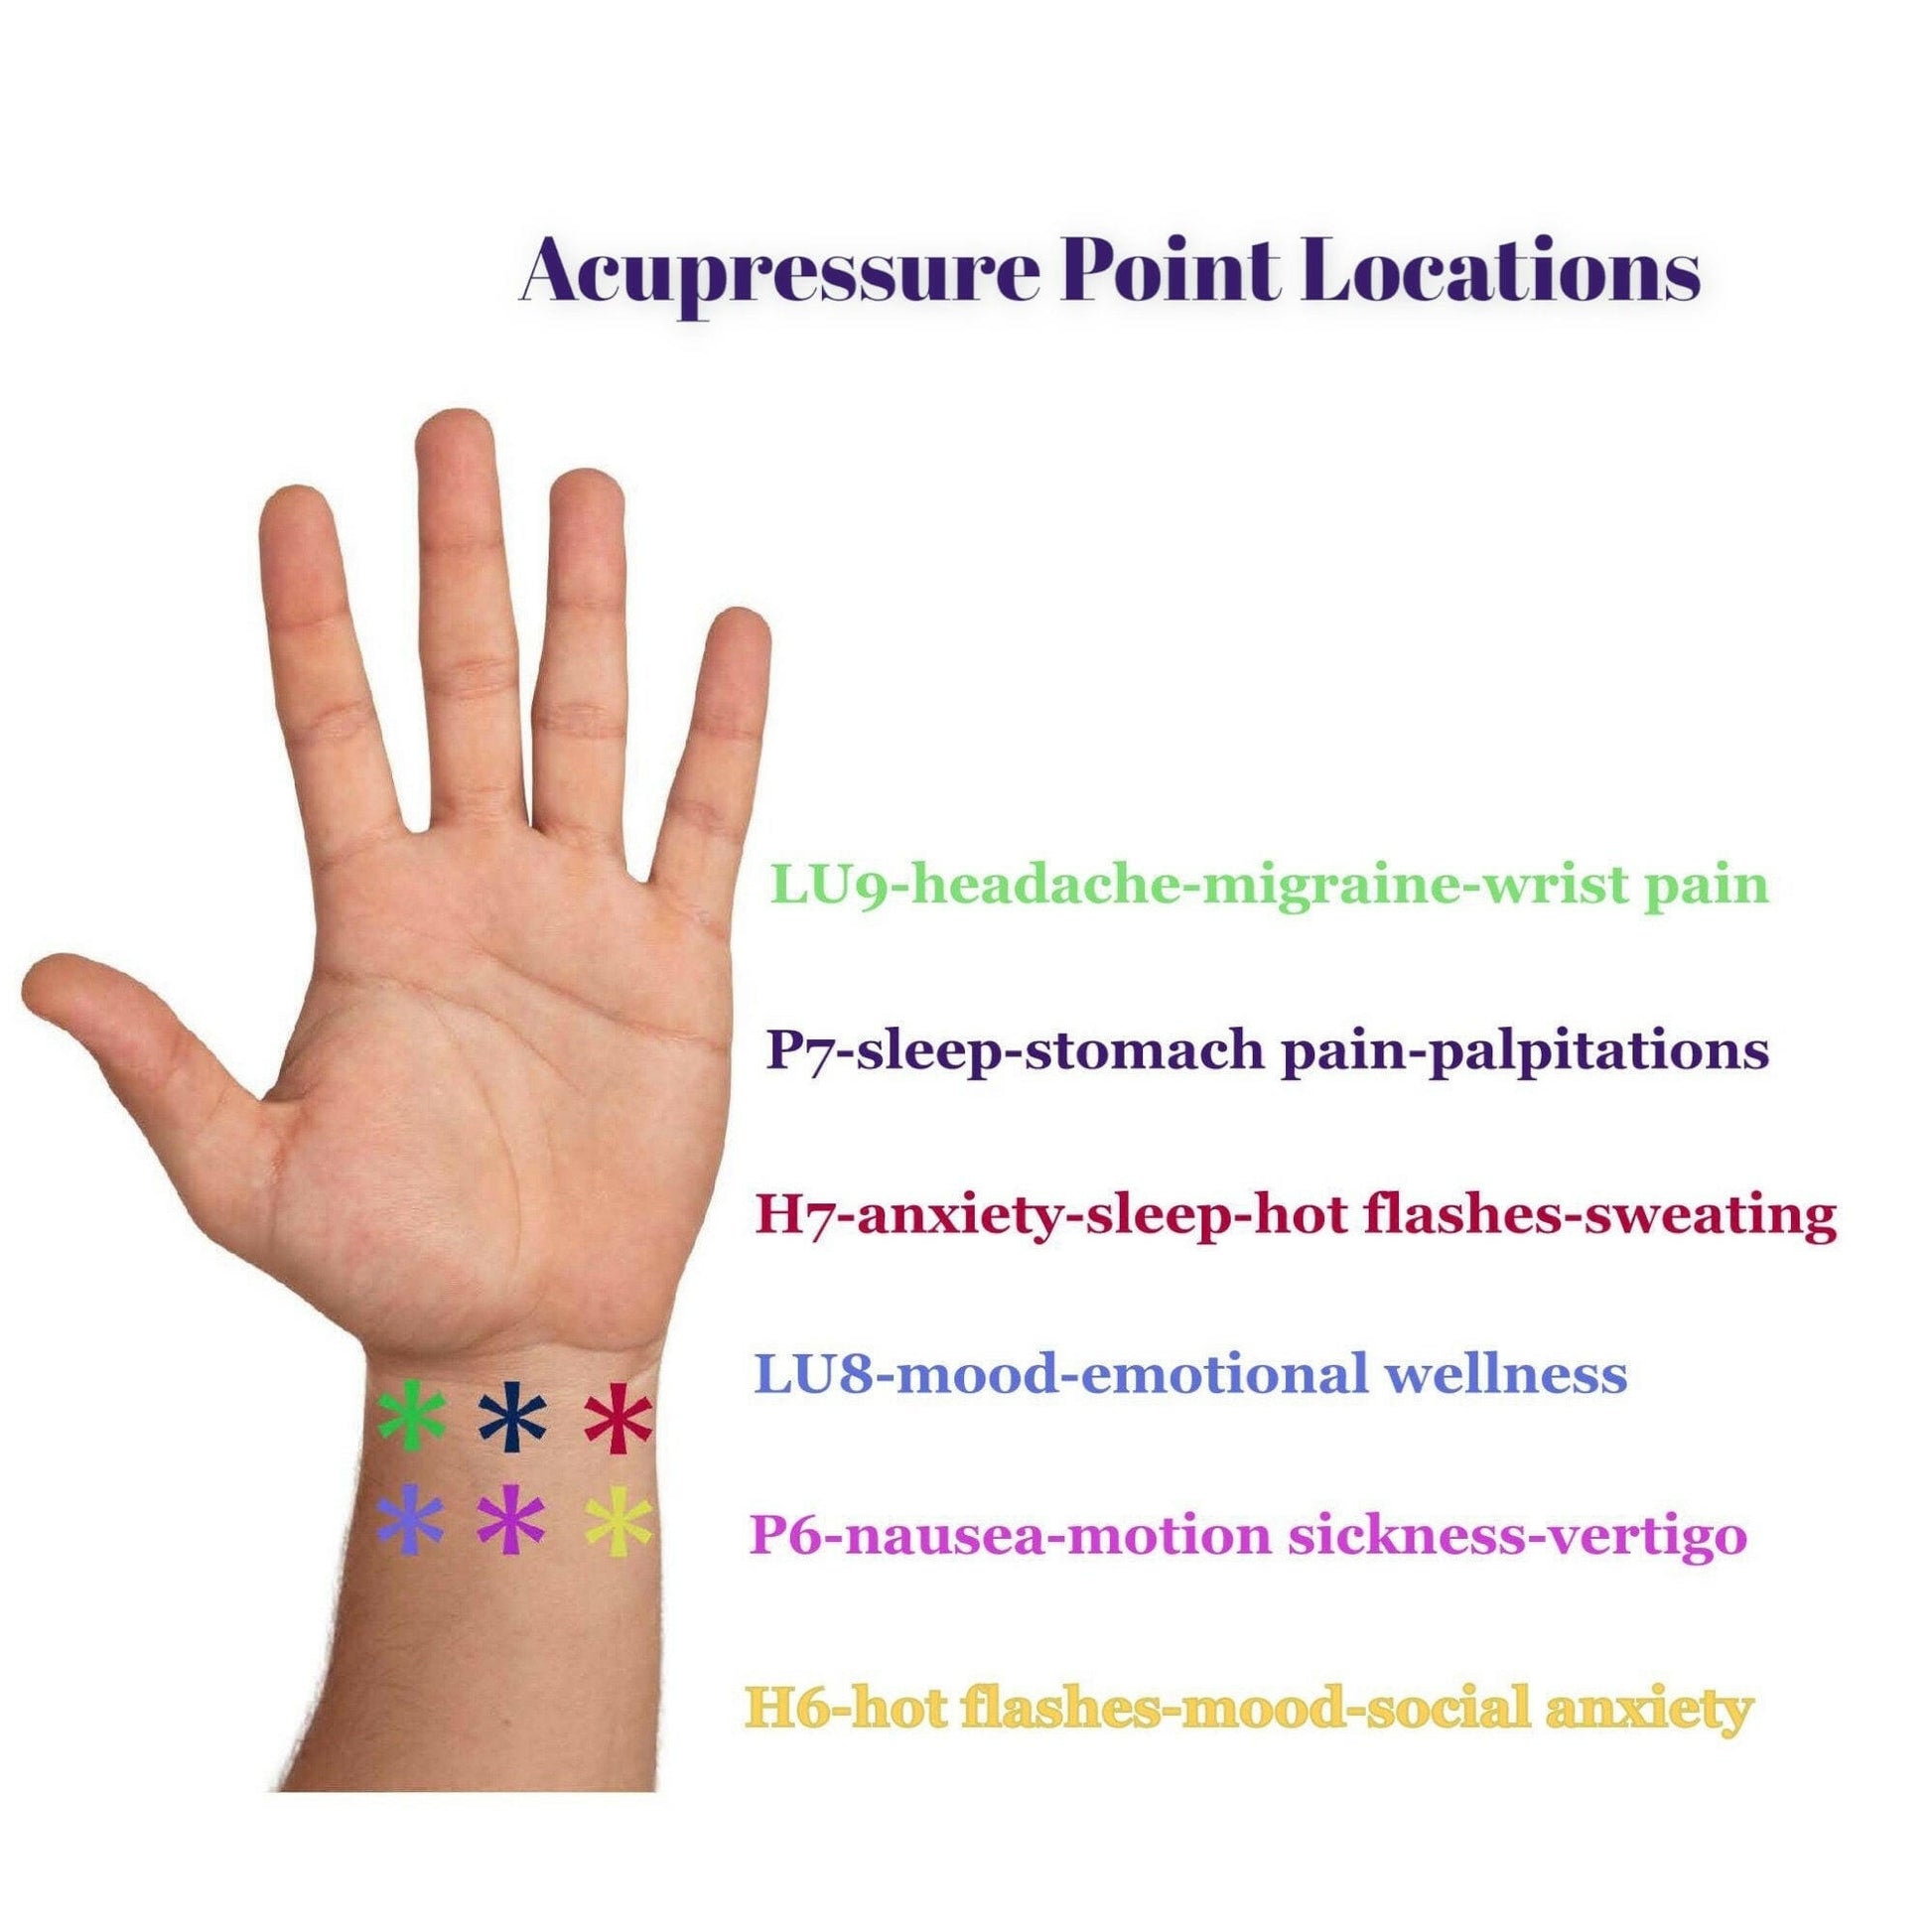 Rubber Band Snap Technique Coping Bracelet-Acupressure with a Snap-Refocus Your Mind-Learn Healthy Habits-Diminish Unwanted Behaviors